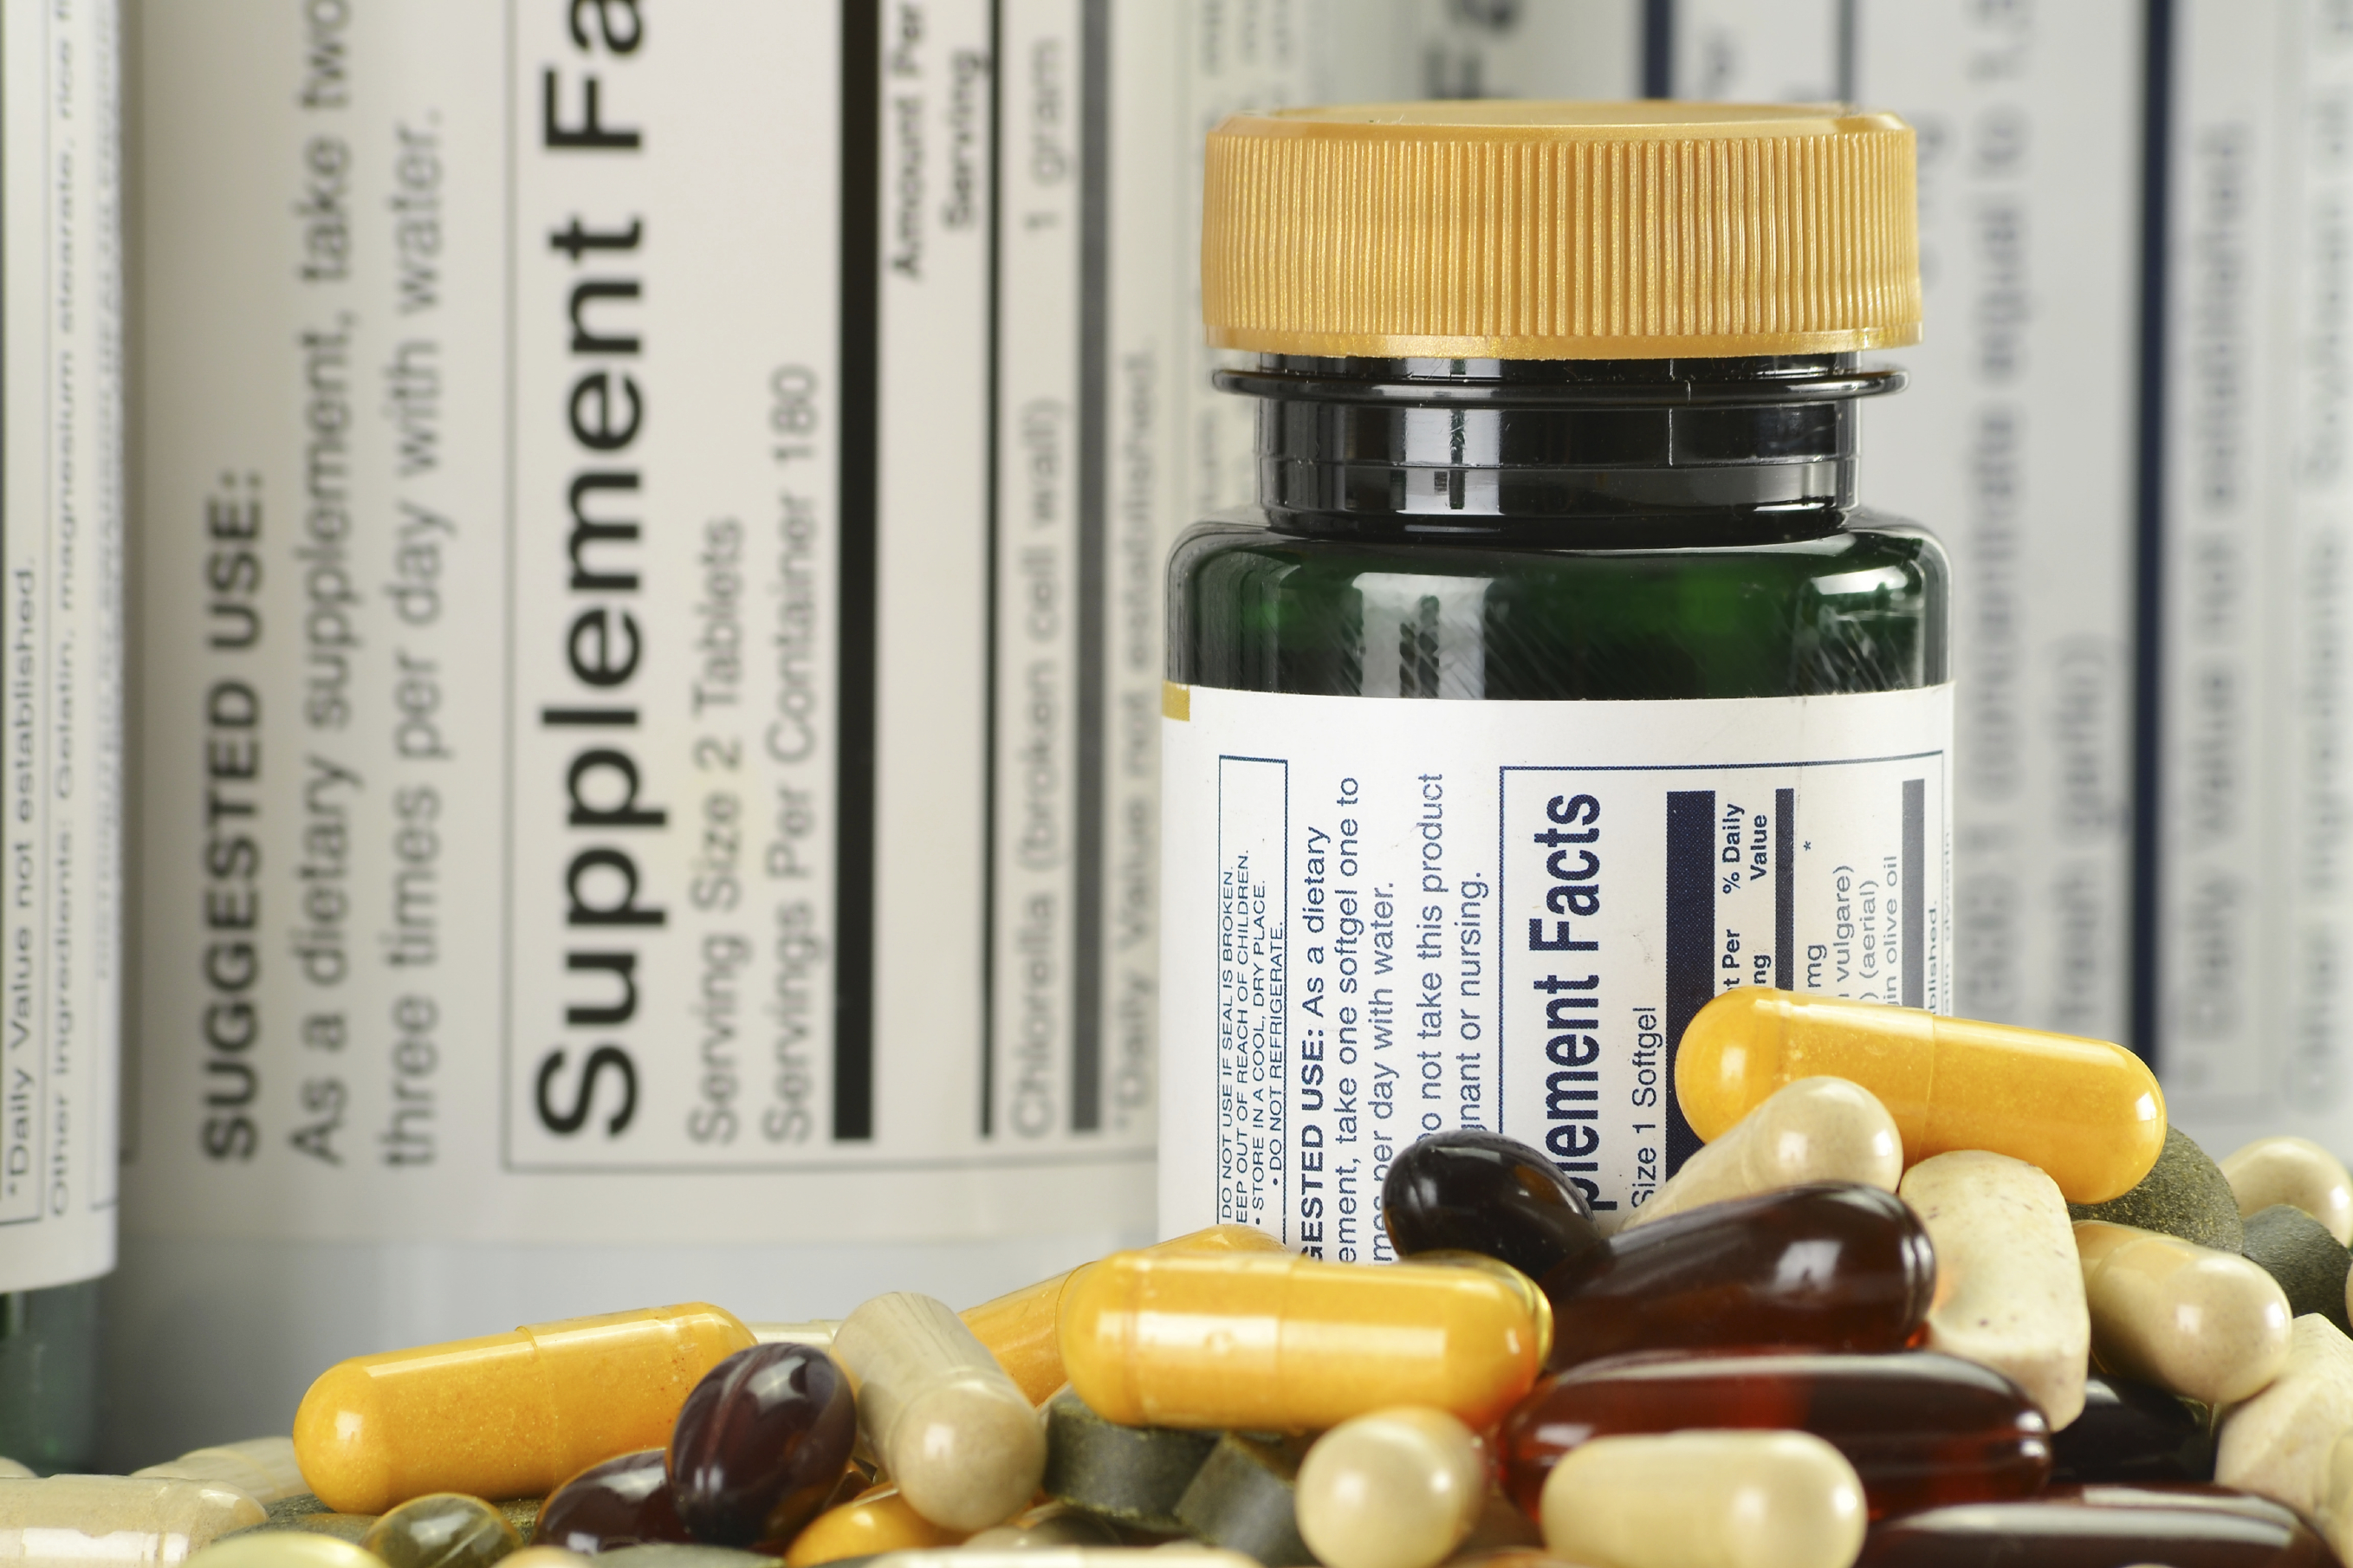 dietary-supplement-use-sends-thousands-to-the-er-each-year-cbs-news